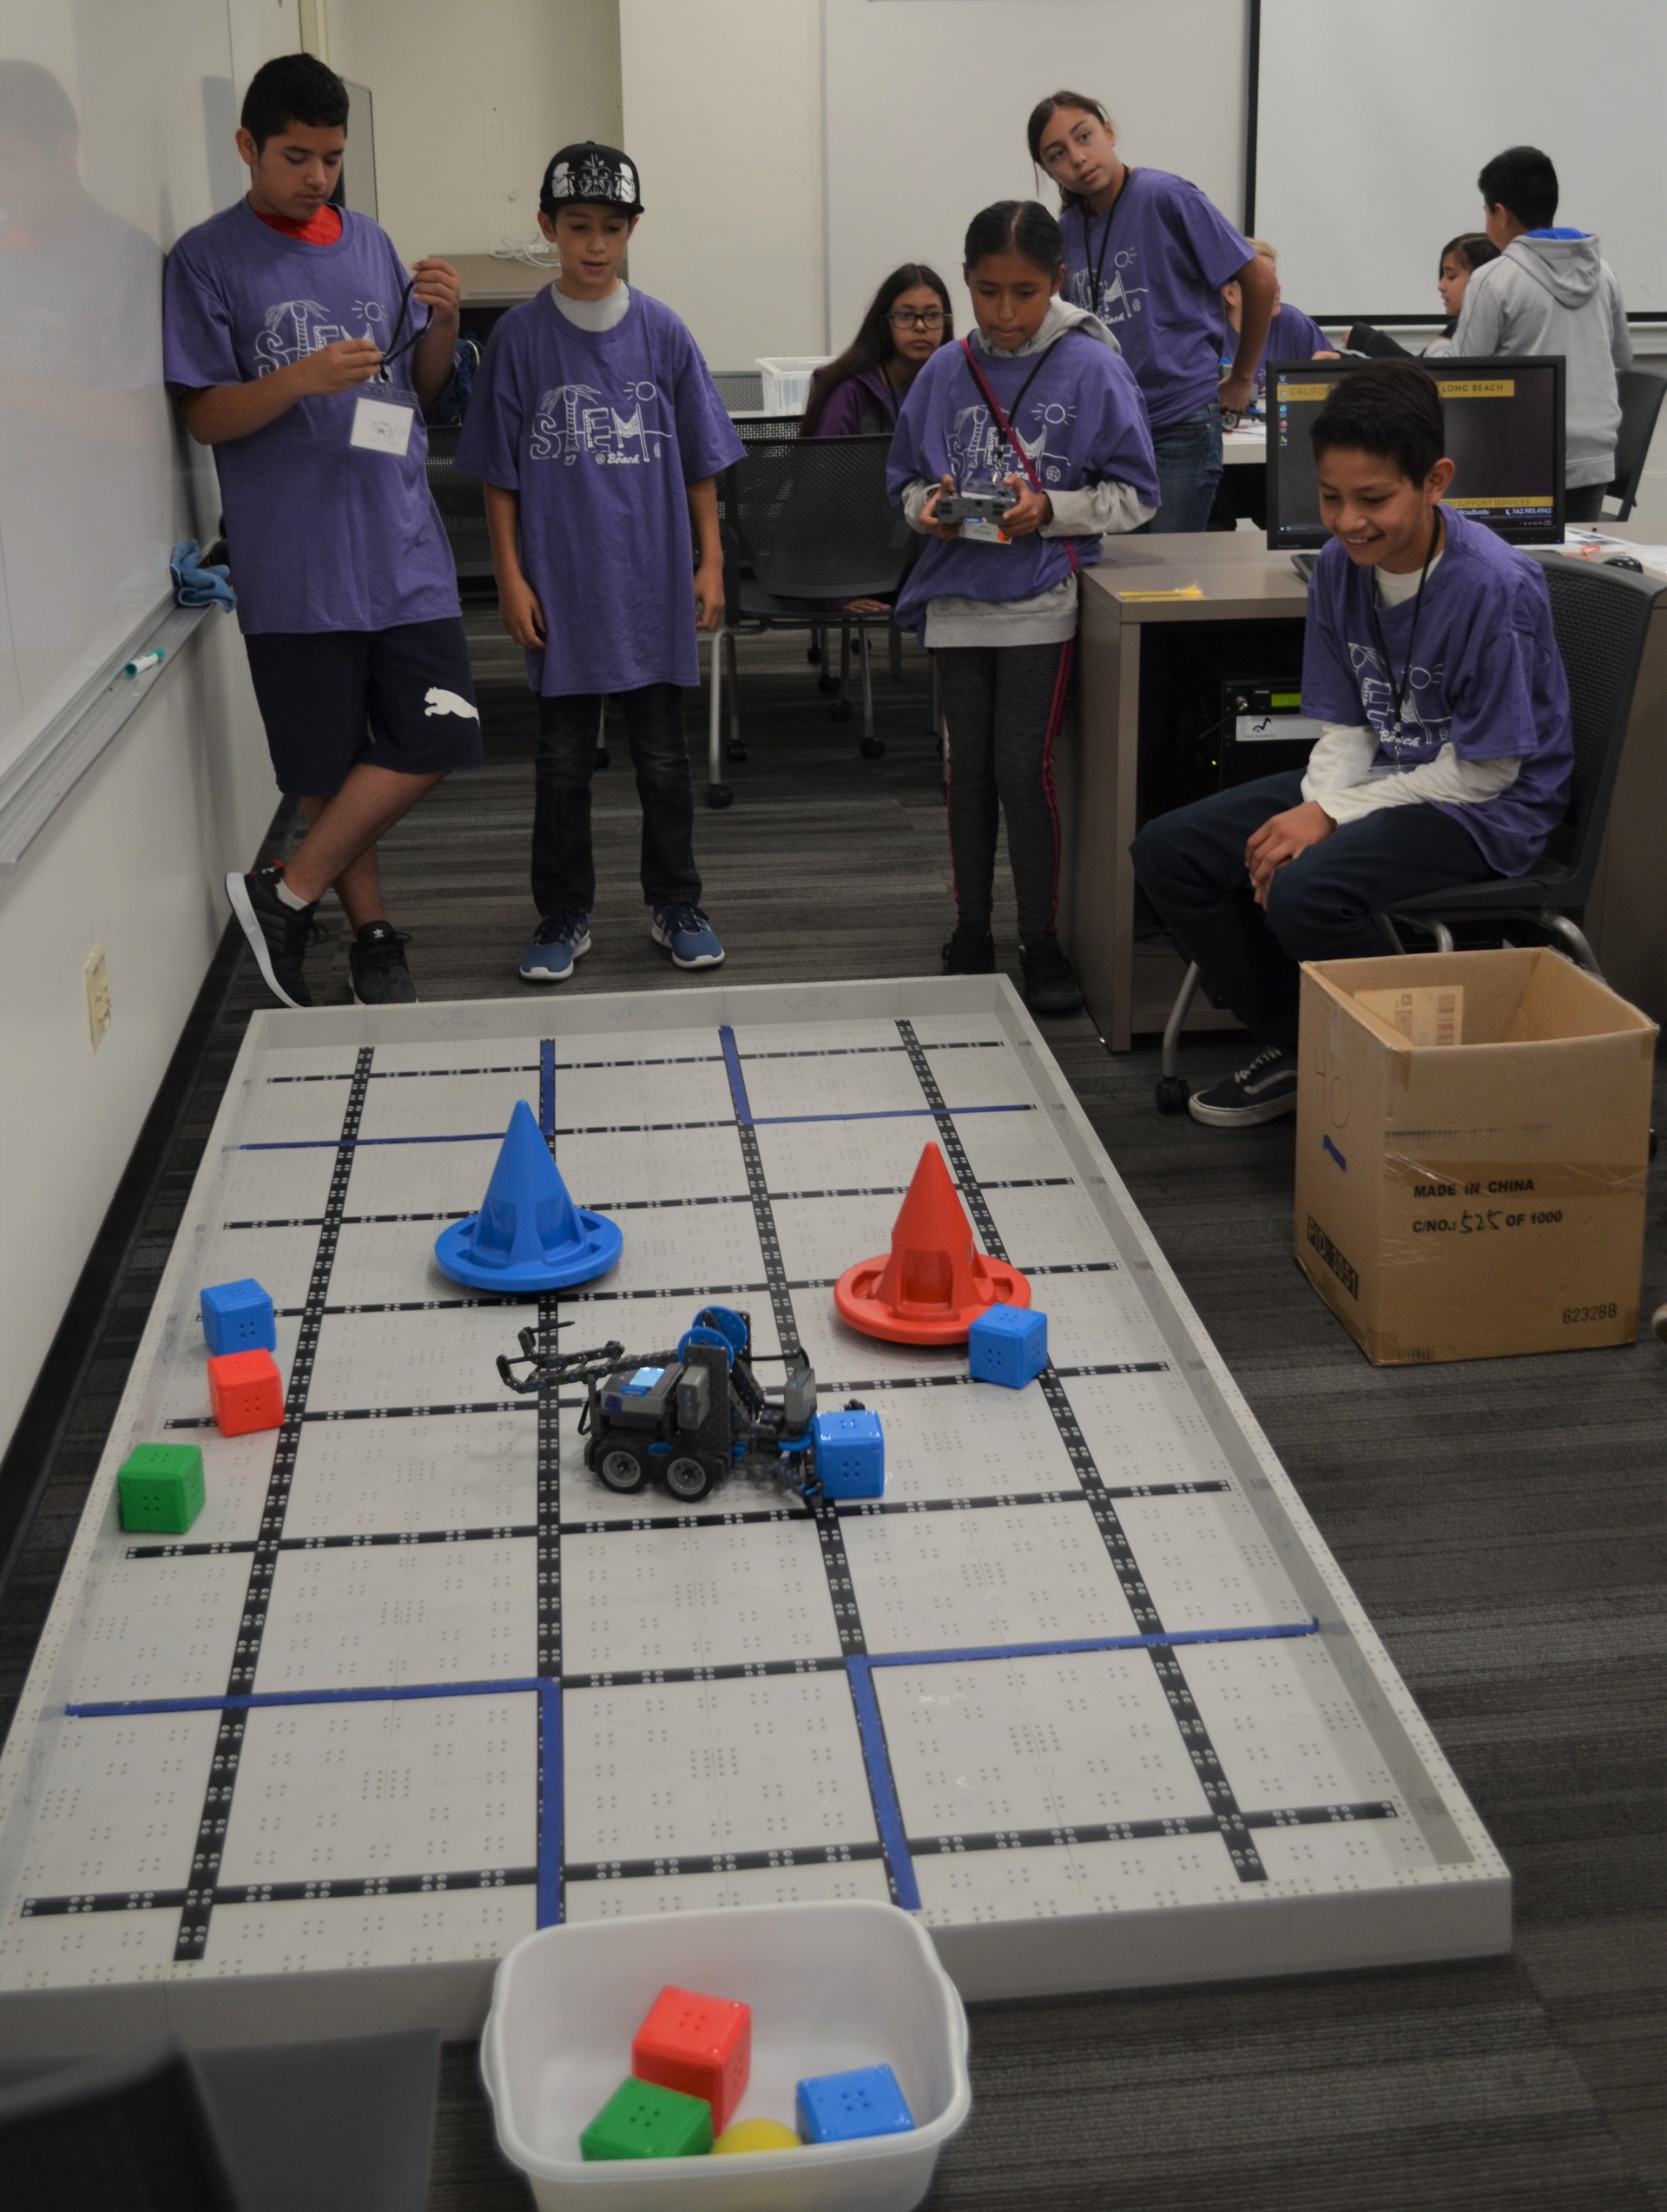 Campers compete with their robots